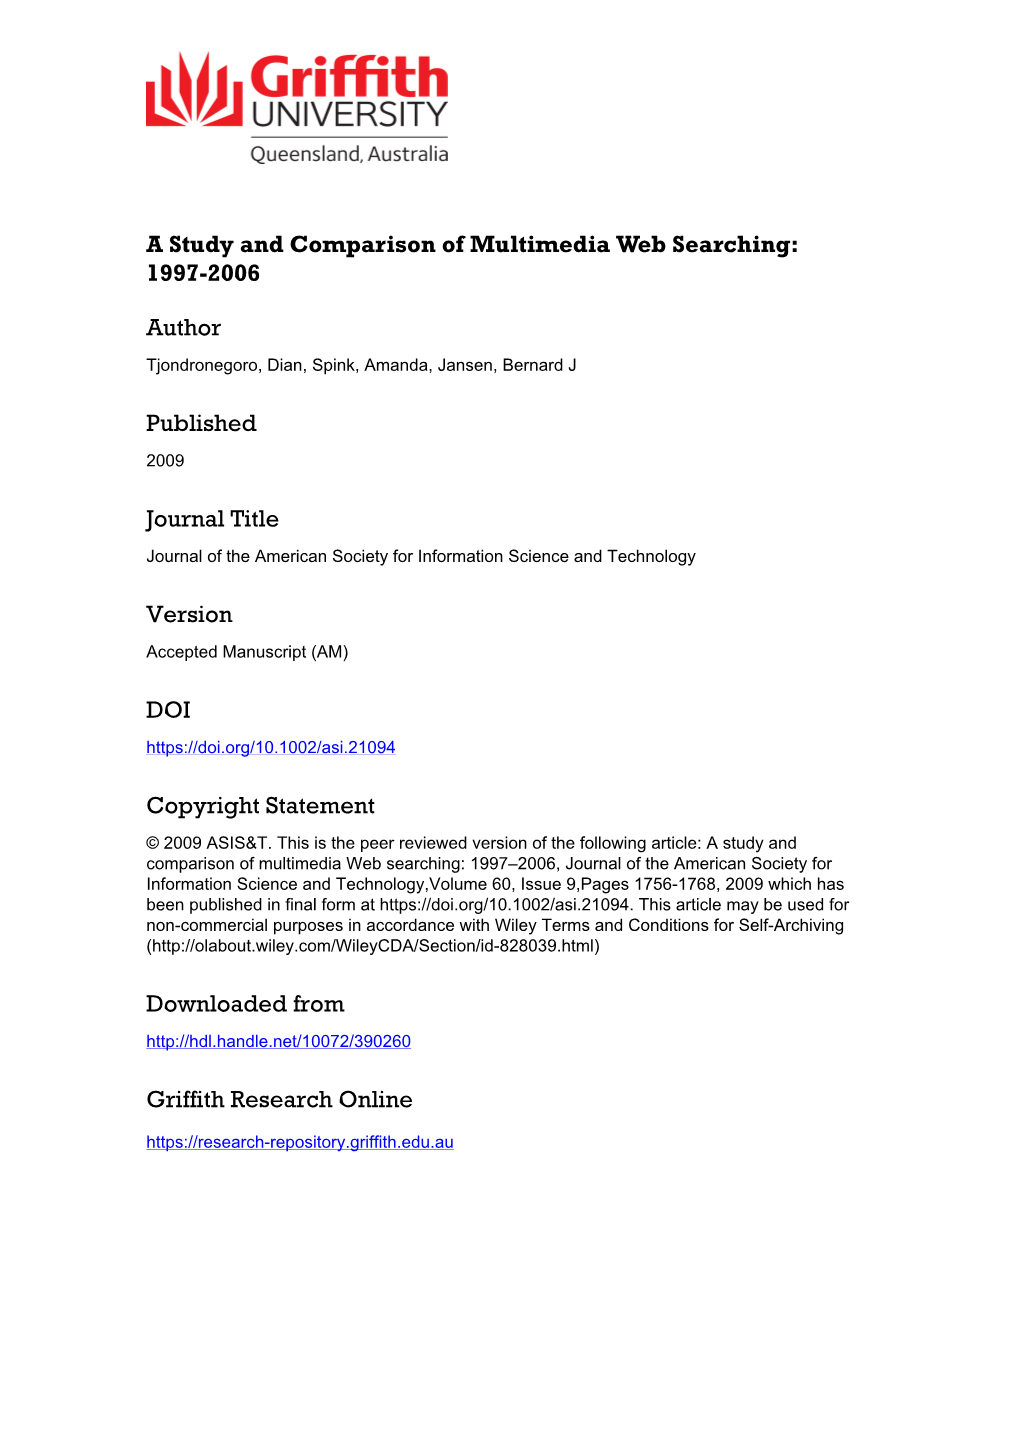 A Study and Comparison of Multimedia Web Searching: 1997-2006